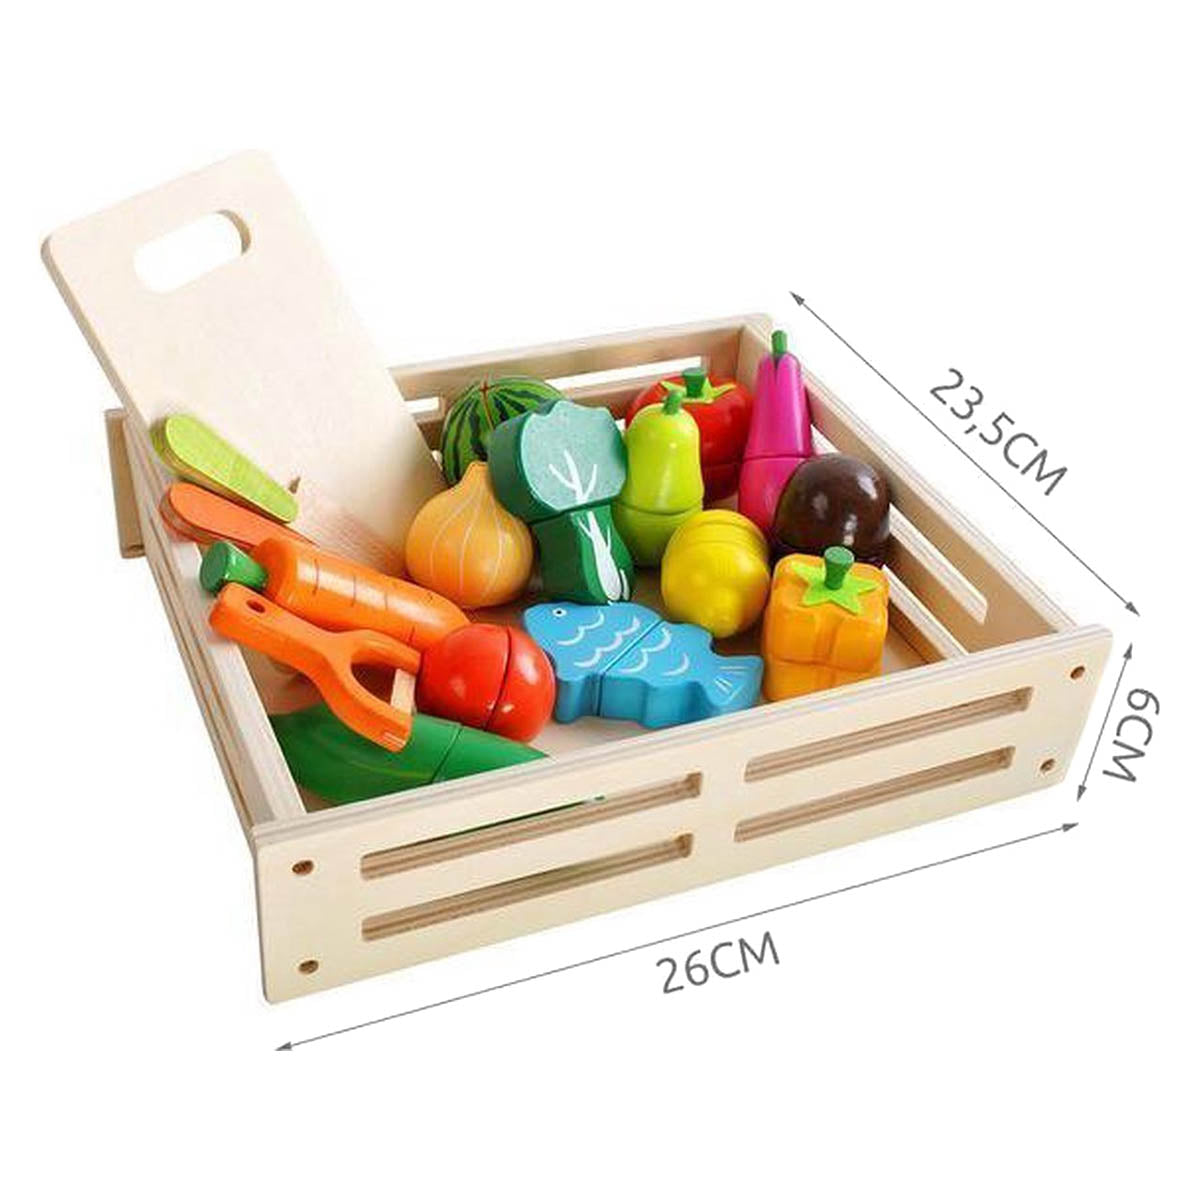 <tc>Ariko</tc> Wooden Toy set fruit and vegetables - 17 pieces - kitchen accessories - Shop toys - Toy food - Toy fruit wood